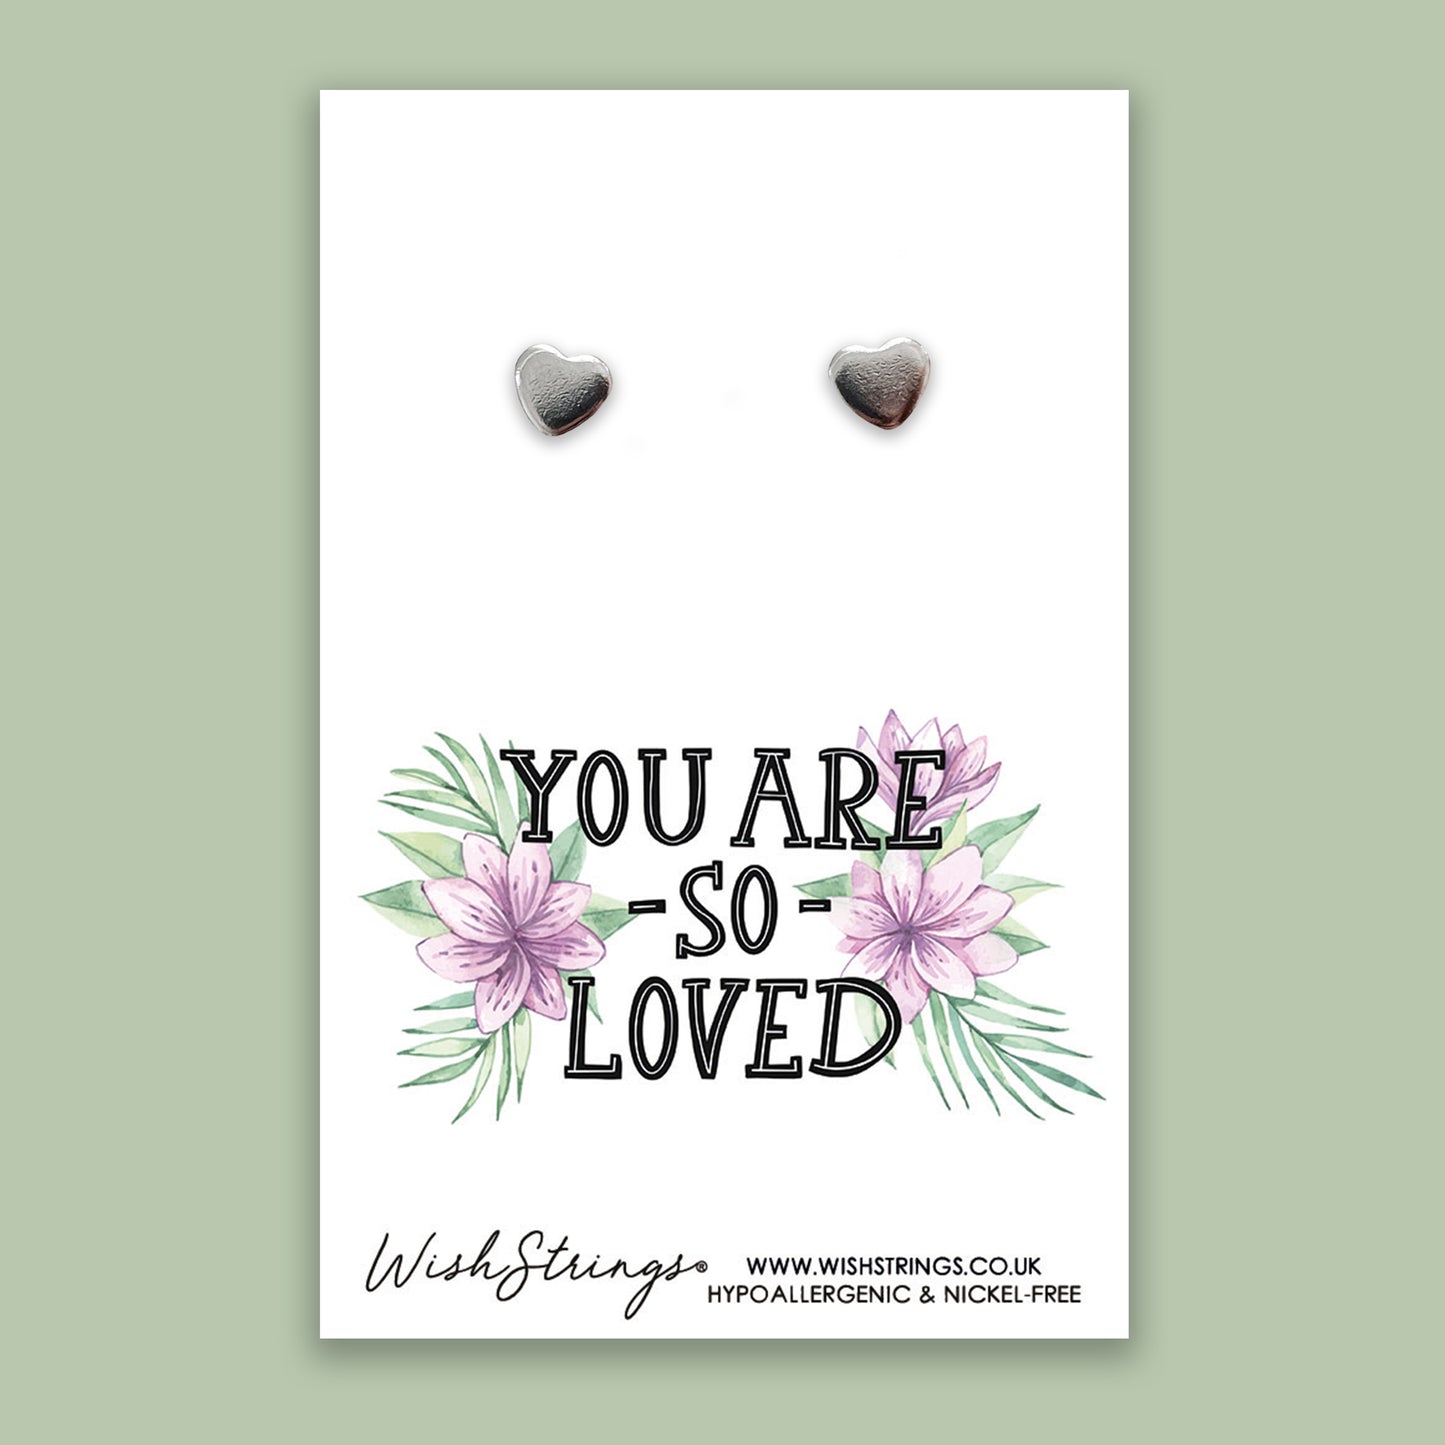 You are so Loved - Silver Heart Stud Earrings | 304 Stainless - Hypoallergenic